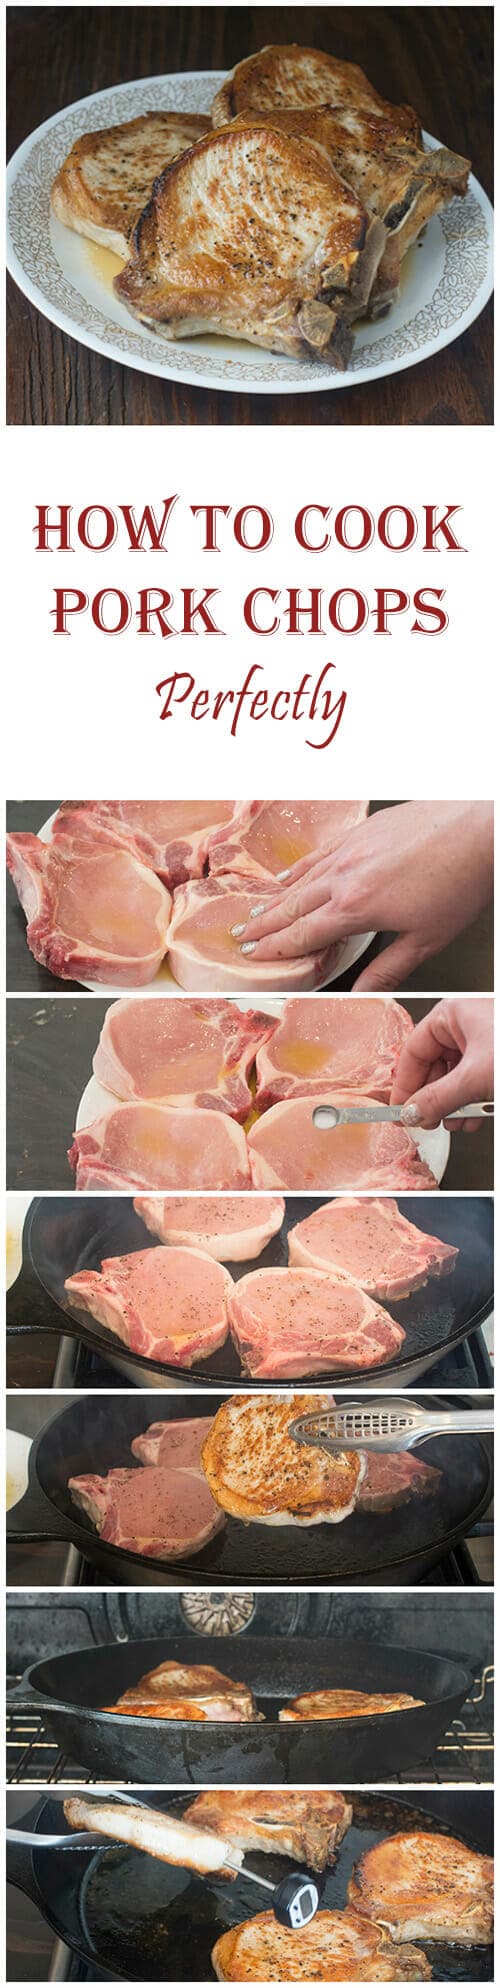 How To Cook Pork Chops Perfectly